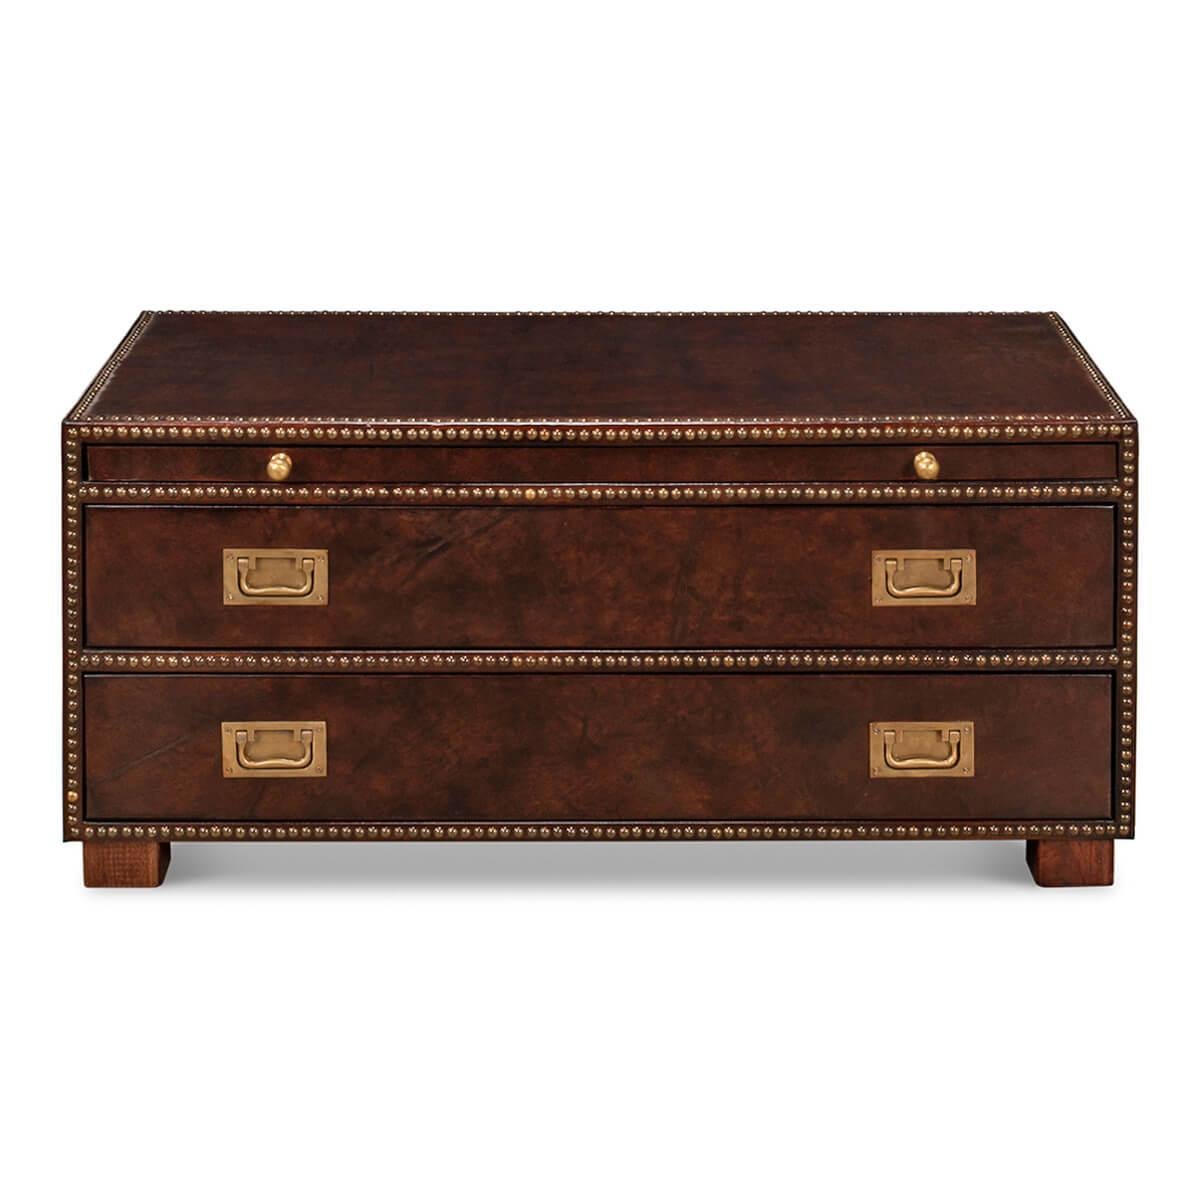 A two-drawer leather wrapped coffee table in the form of a low chest with brass nailhead trim. Covered in rich dark brown leather with brass accents, this chest has a luxurious look and feel. It has a practical design, including two drawers for